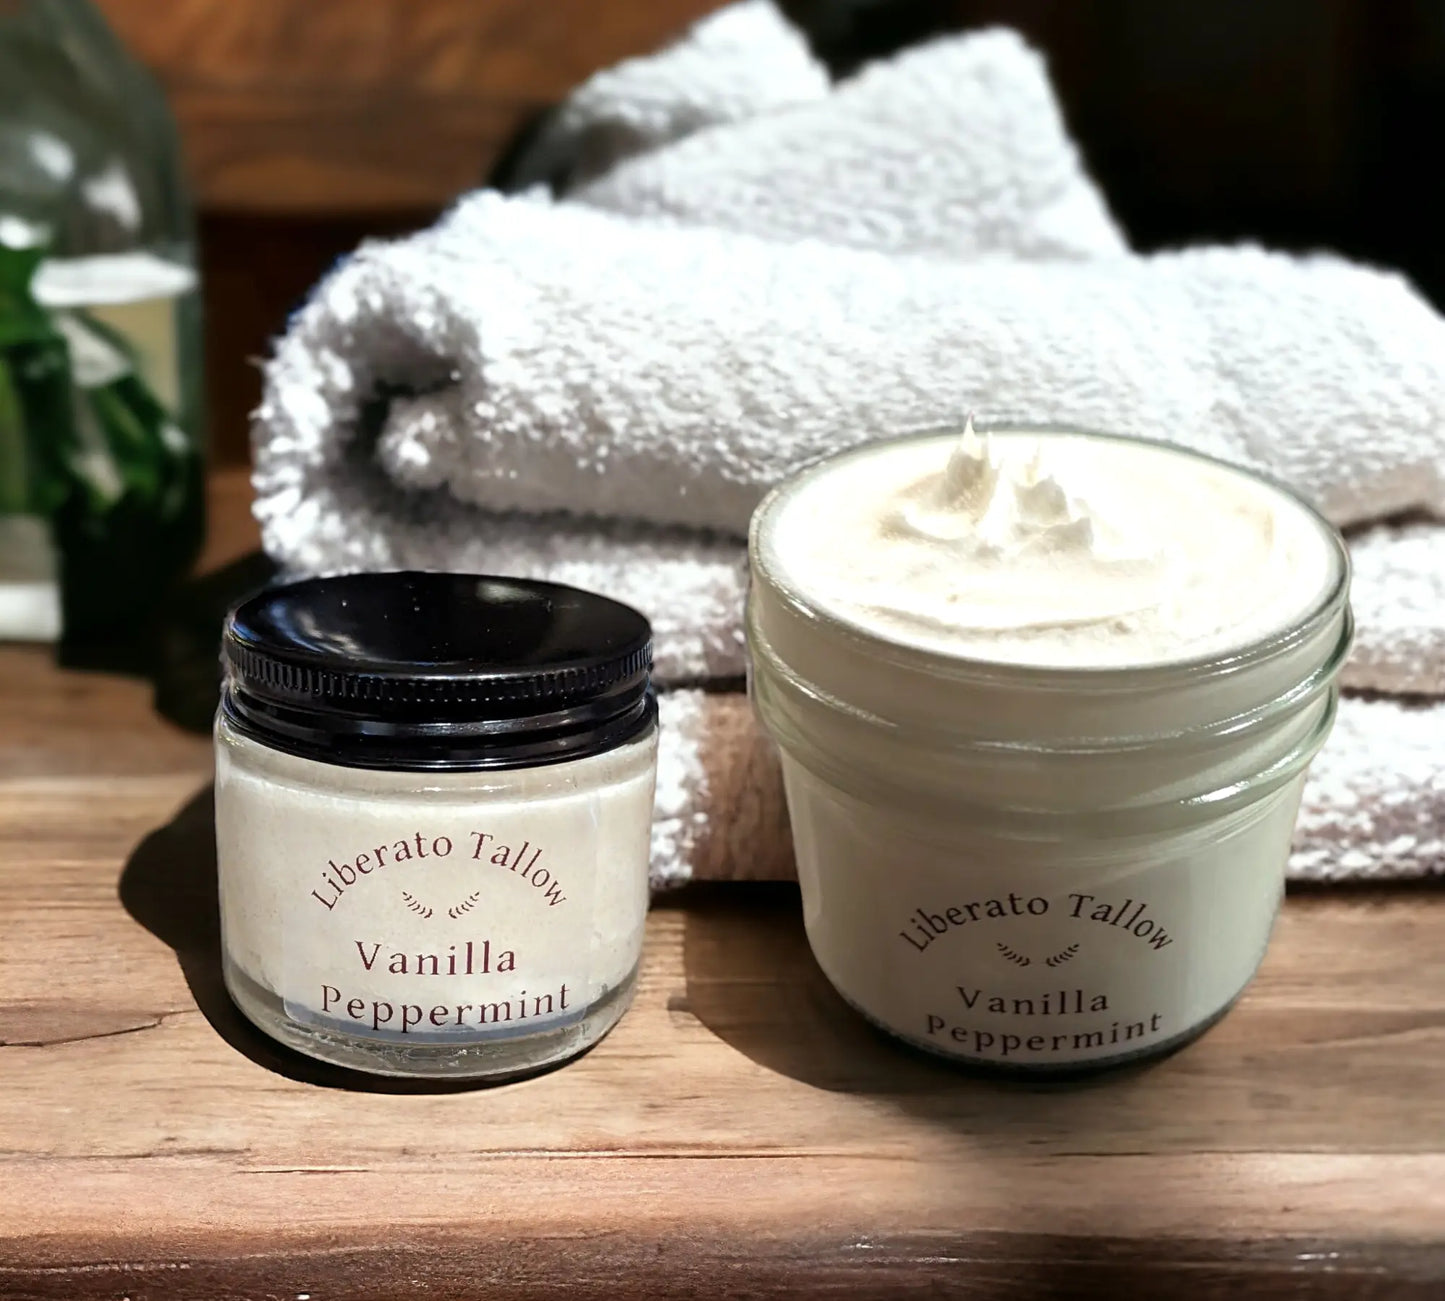 Whipped Vanilla Peppermint Tallow Natural Lotion Liberato Tallow